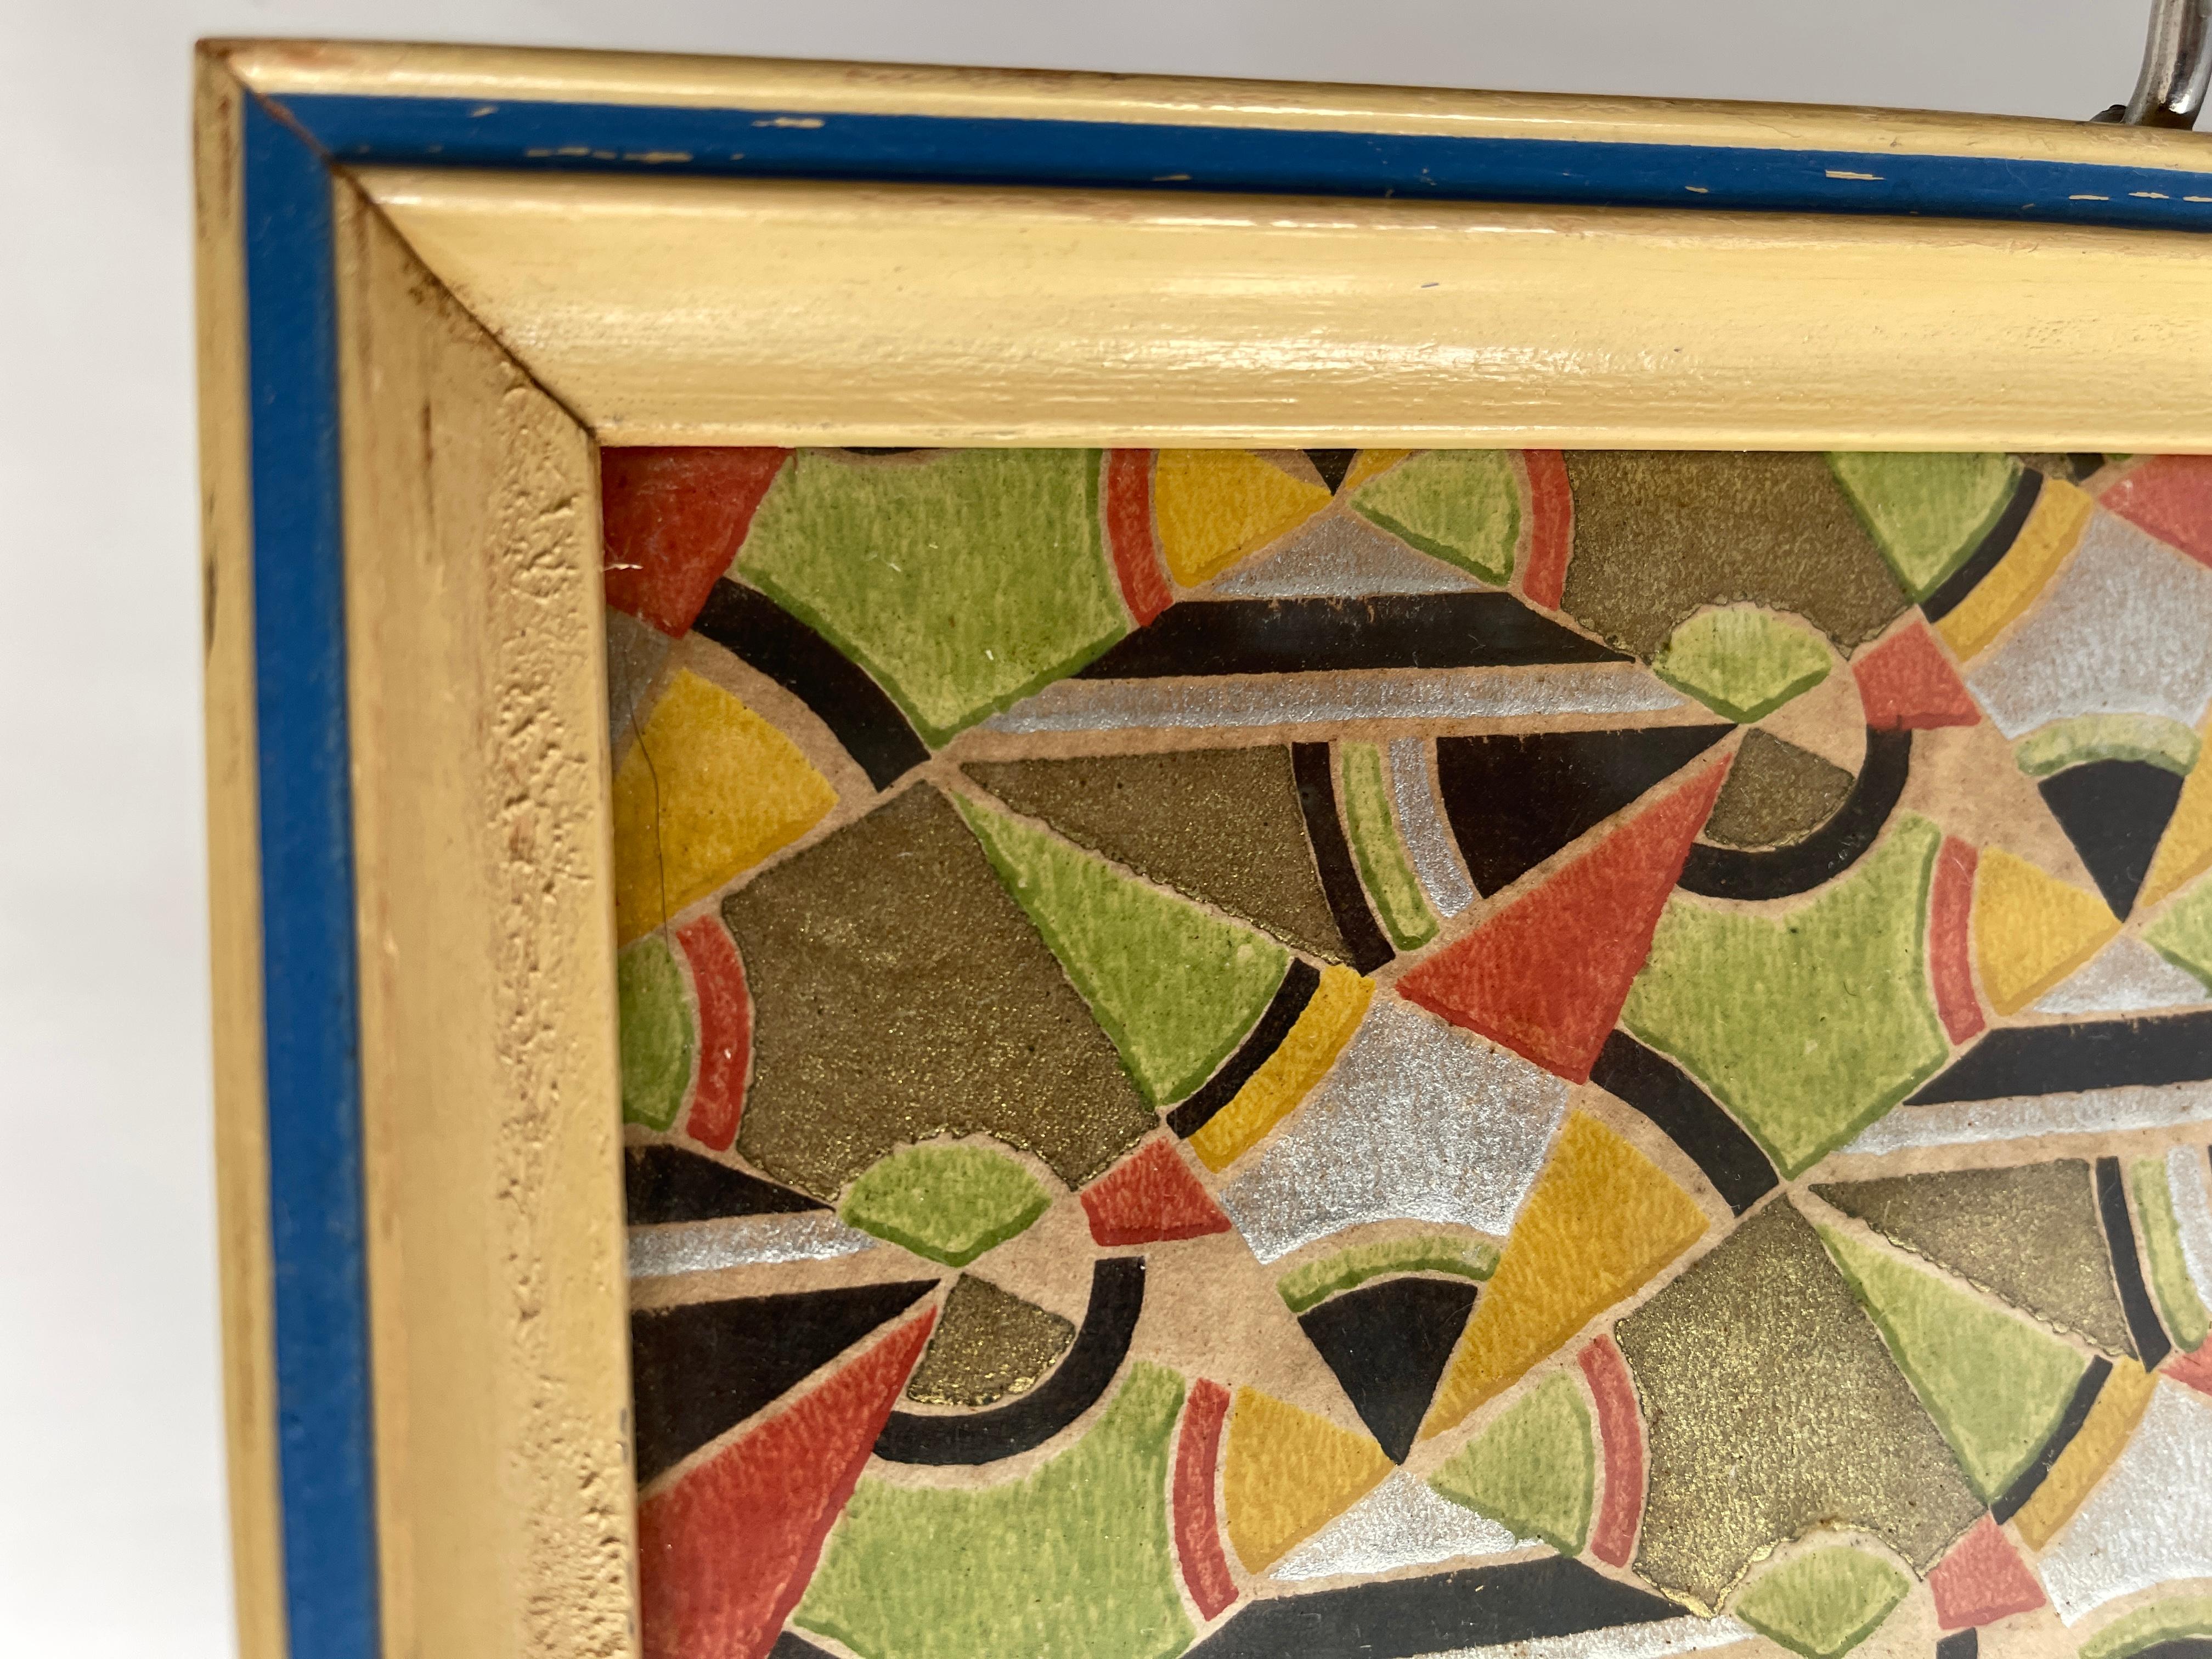 Art Deco rectangular serving tray with geometric design hand painted paper framed under glass with blue and ivory painted wood frame. One wood and chrome handle on each end. Frame has some wear., as depicted in photos.
Tray without handles measures